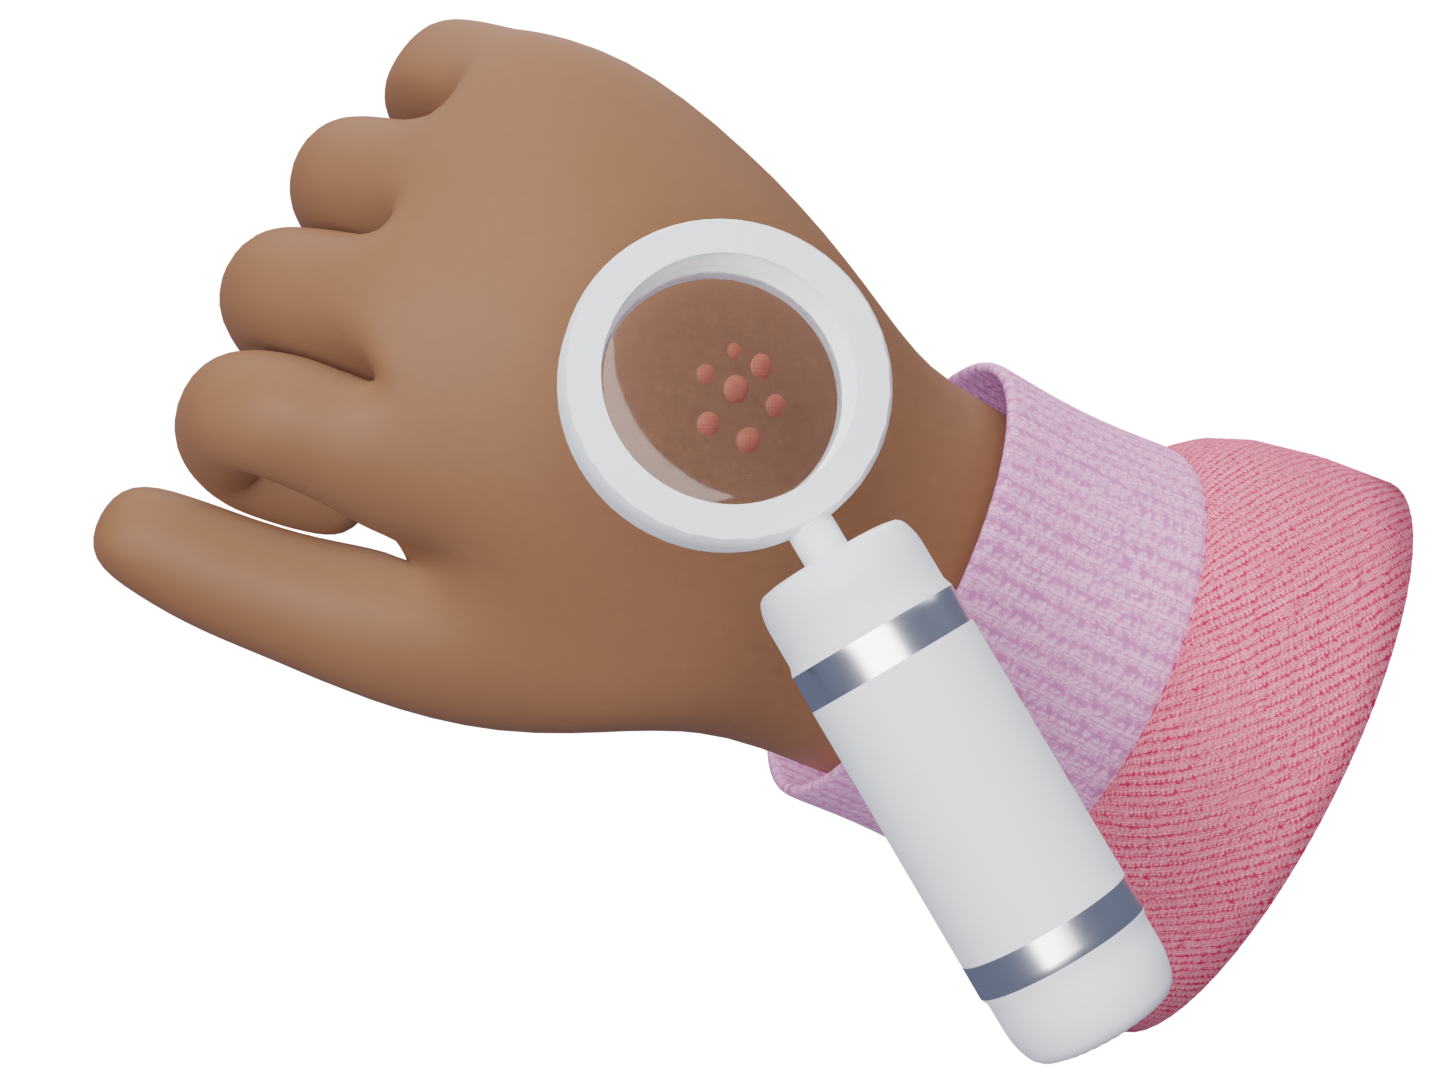 A hand with a rash is being looked at through a magnifying glass.